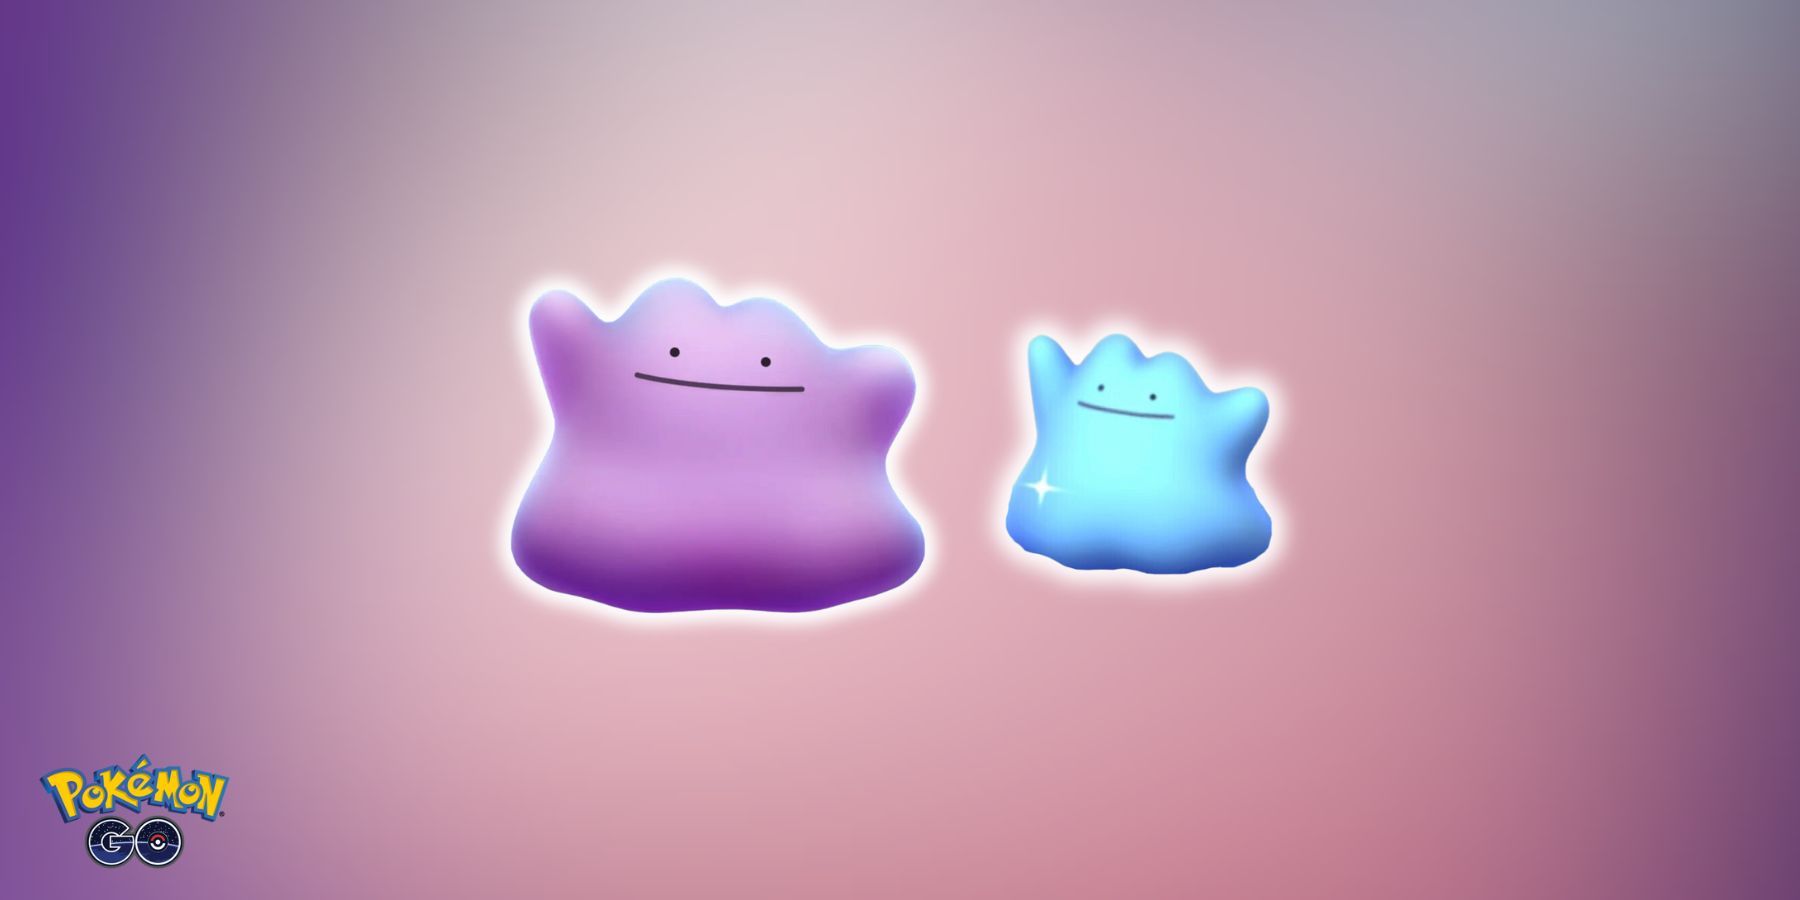 Ditto and Shiny Ditto Disguises in Pokemon GO